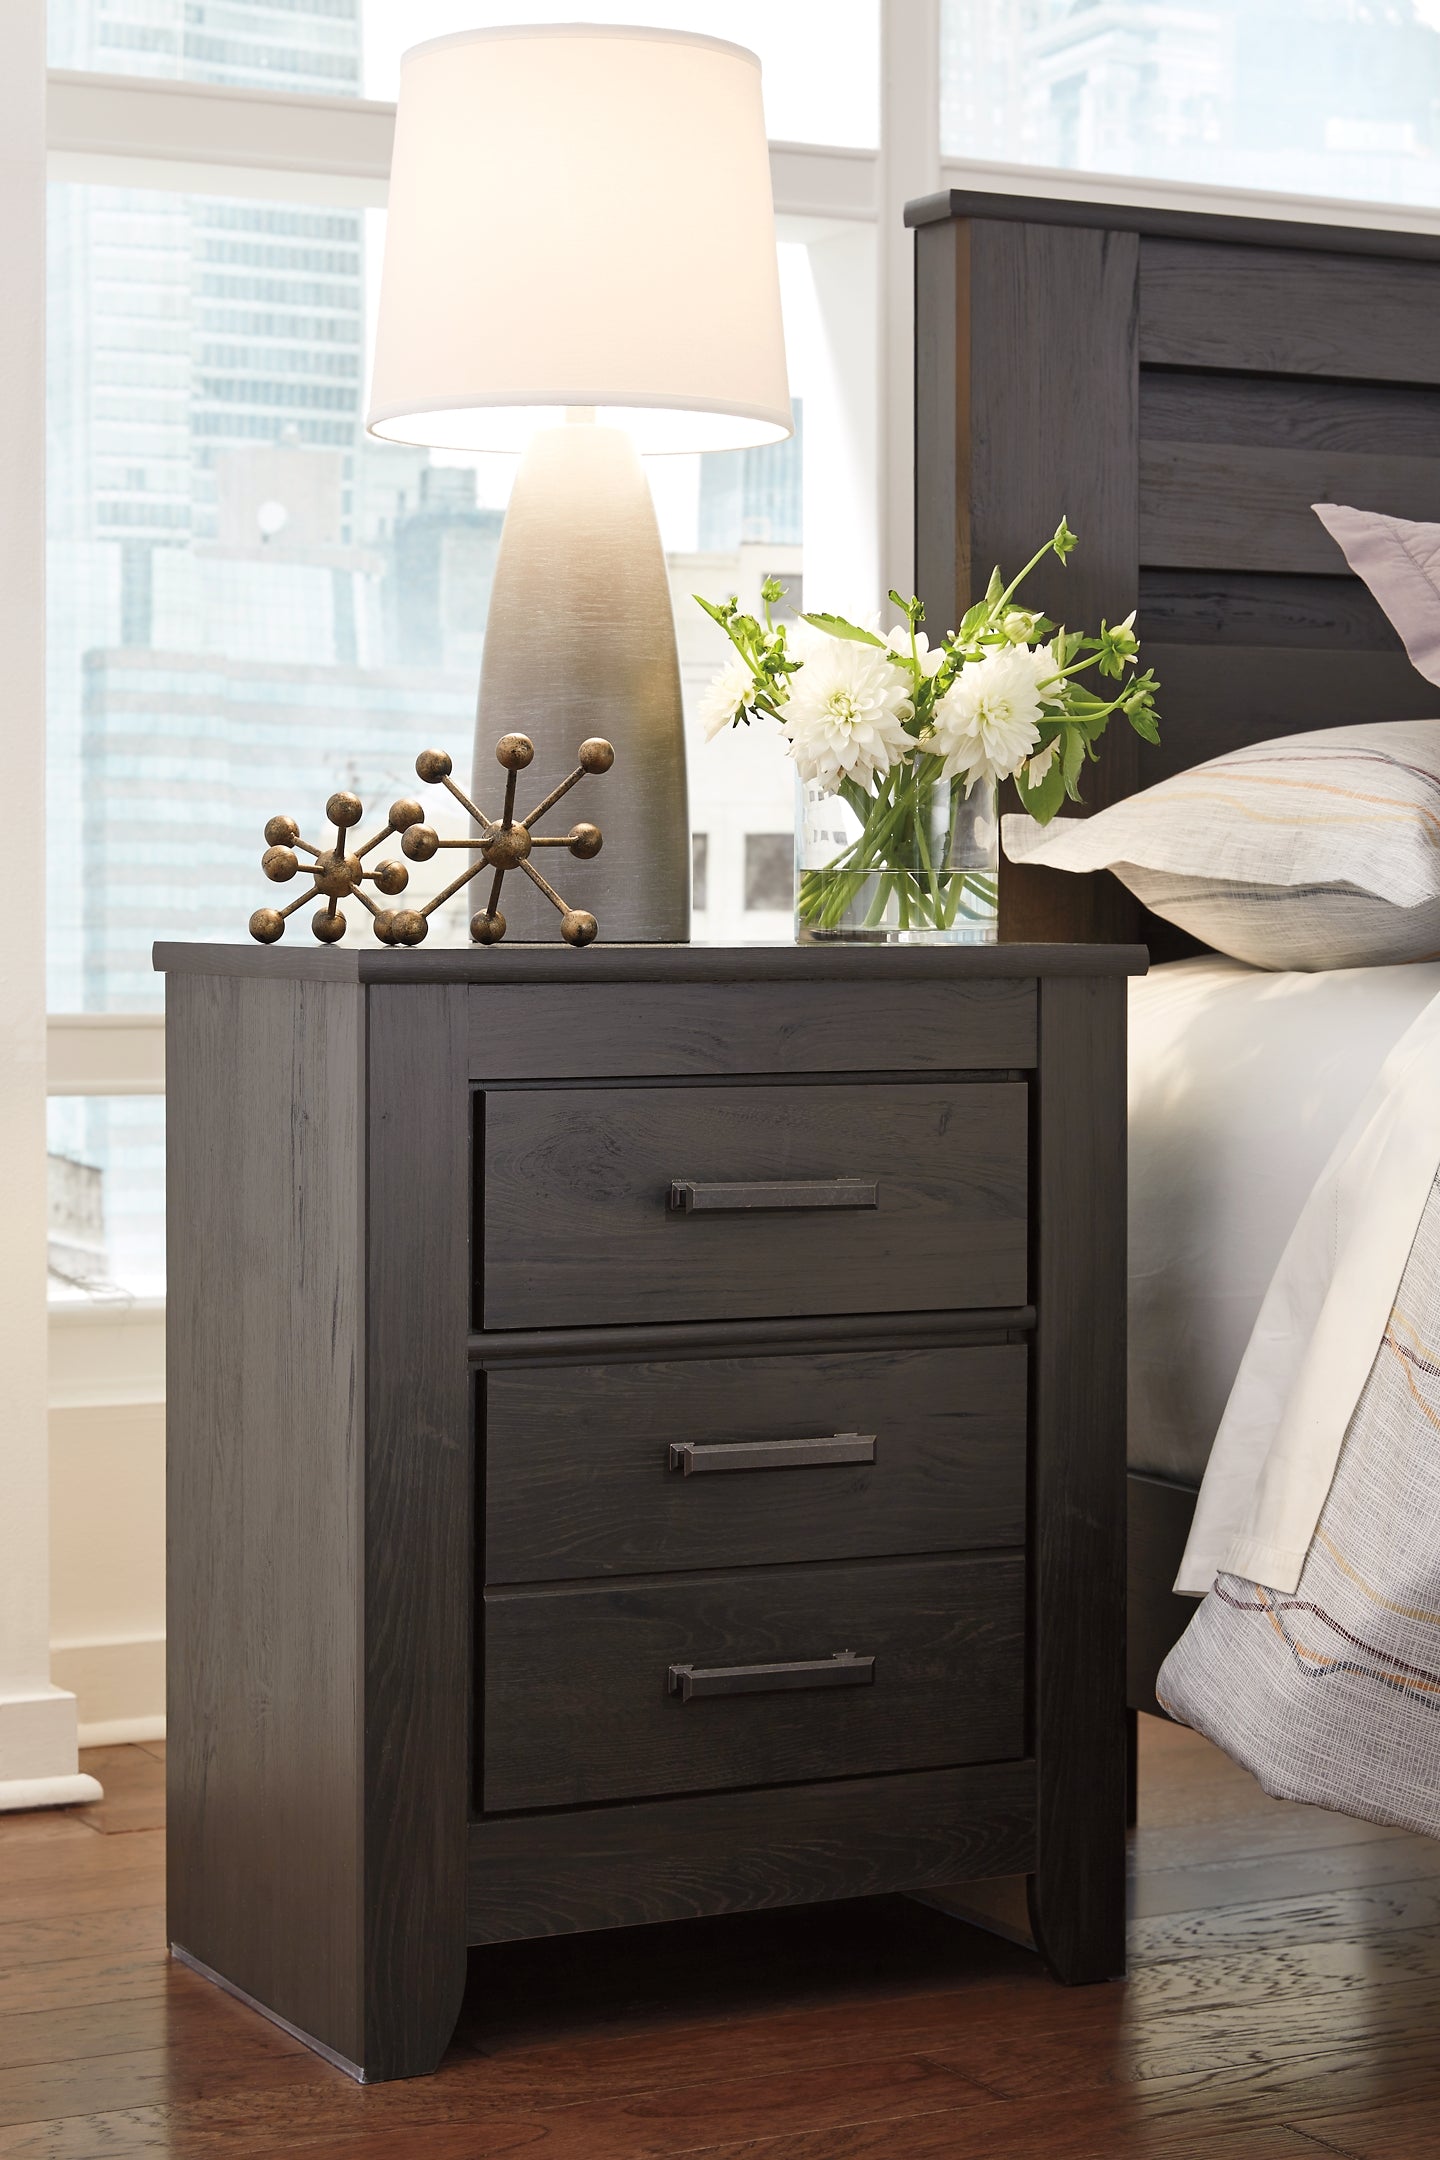 Brinxton Two Drawer Night Stand at Walker Mattress and Furniture Locations in Cedar Park and Belton TX.